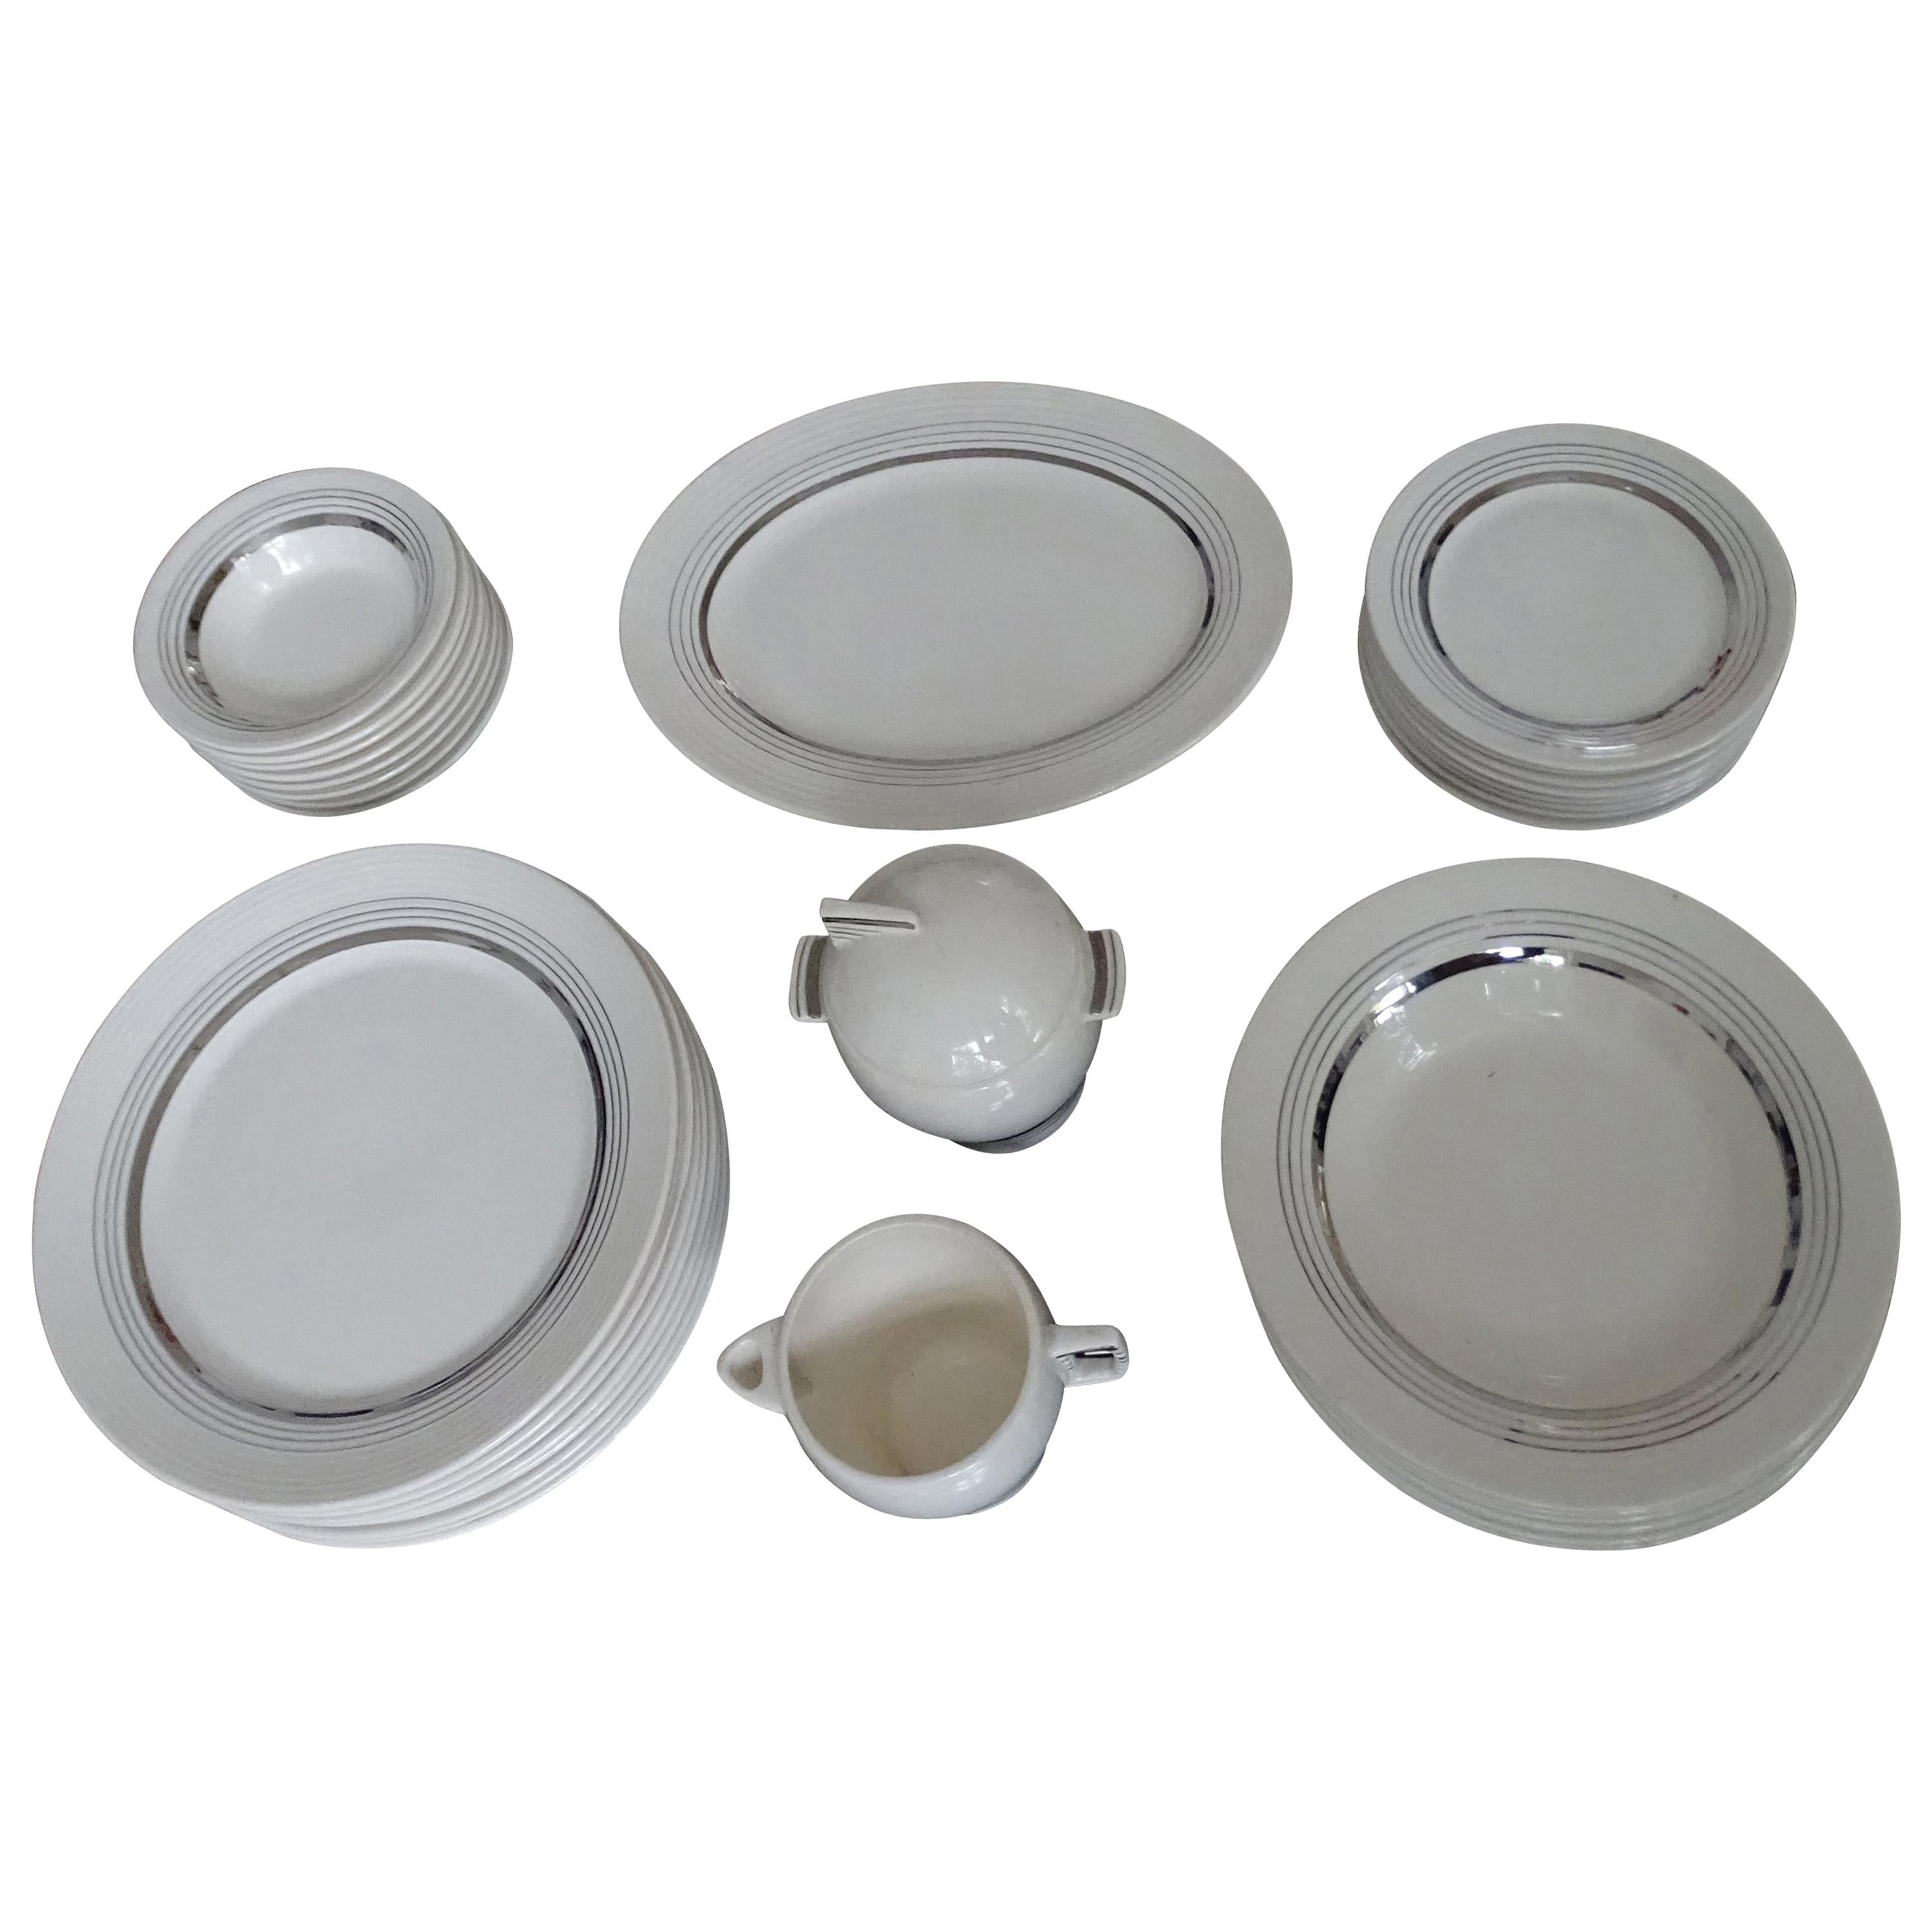 Art Deco American Limoges White Gold China Dinnerware Service Set, 1930s For Sale